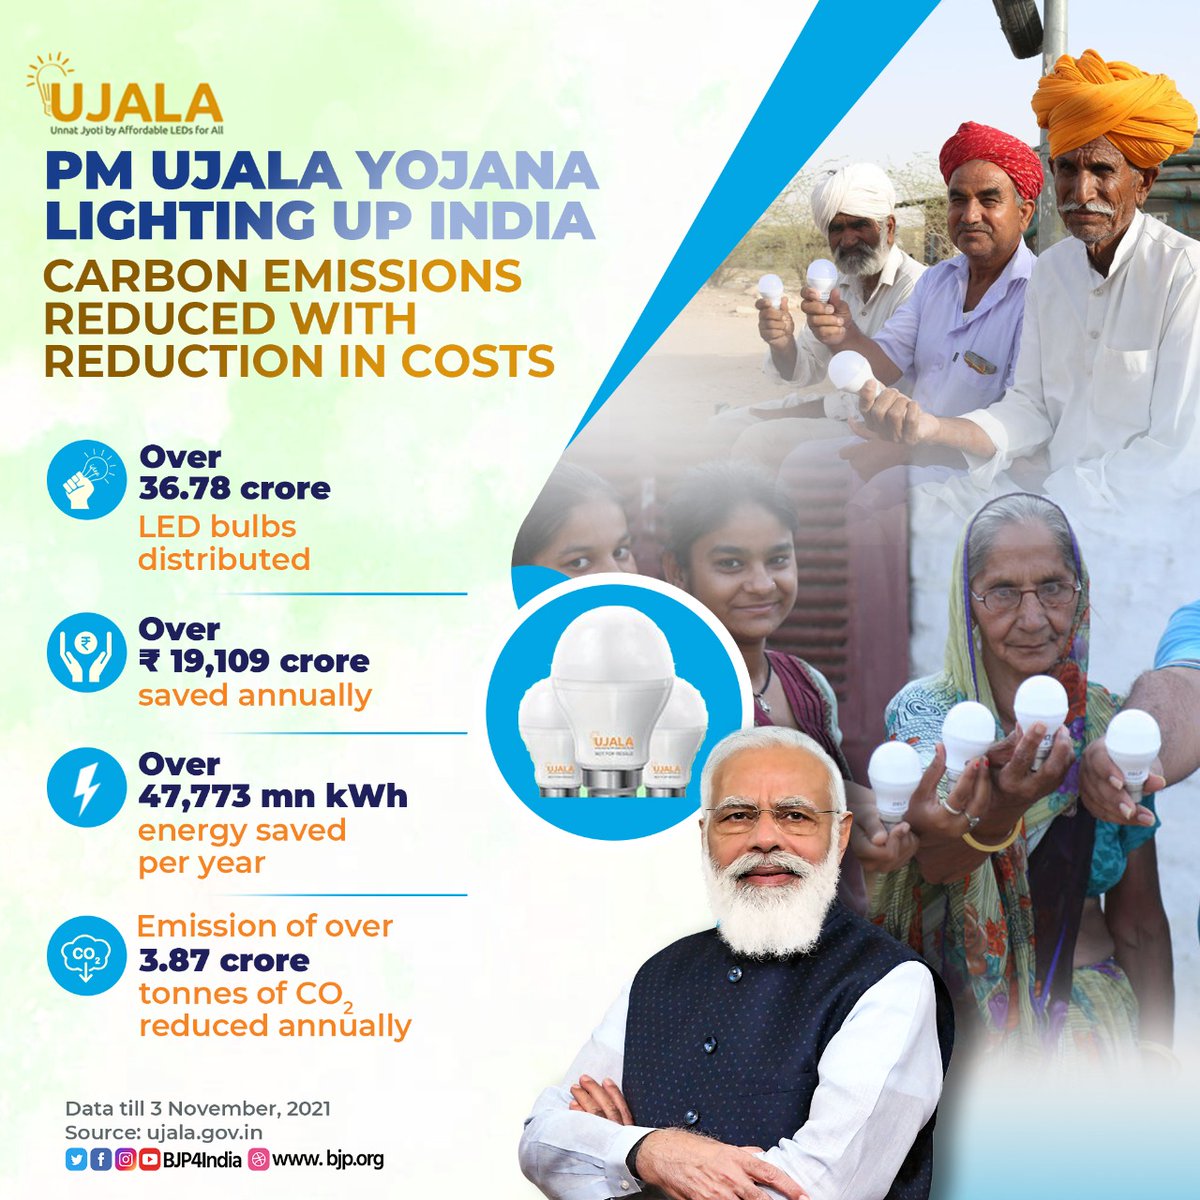 Ranjeet Kumar Dass on Twitter: &quot;India is lighting up sustainably and  getting its carbon footprints reduced substantially through PM Ujala Yojana.  Grateful to the insightful leadership of Hon&#39;ble PM Shri @narendramodi  Dangoria